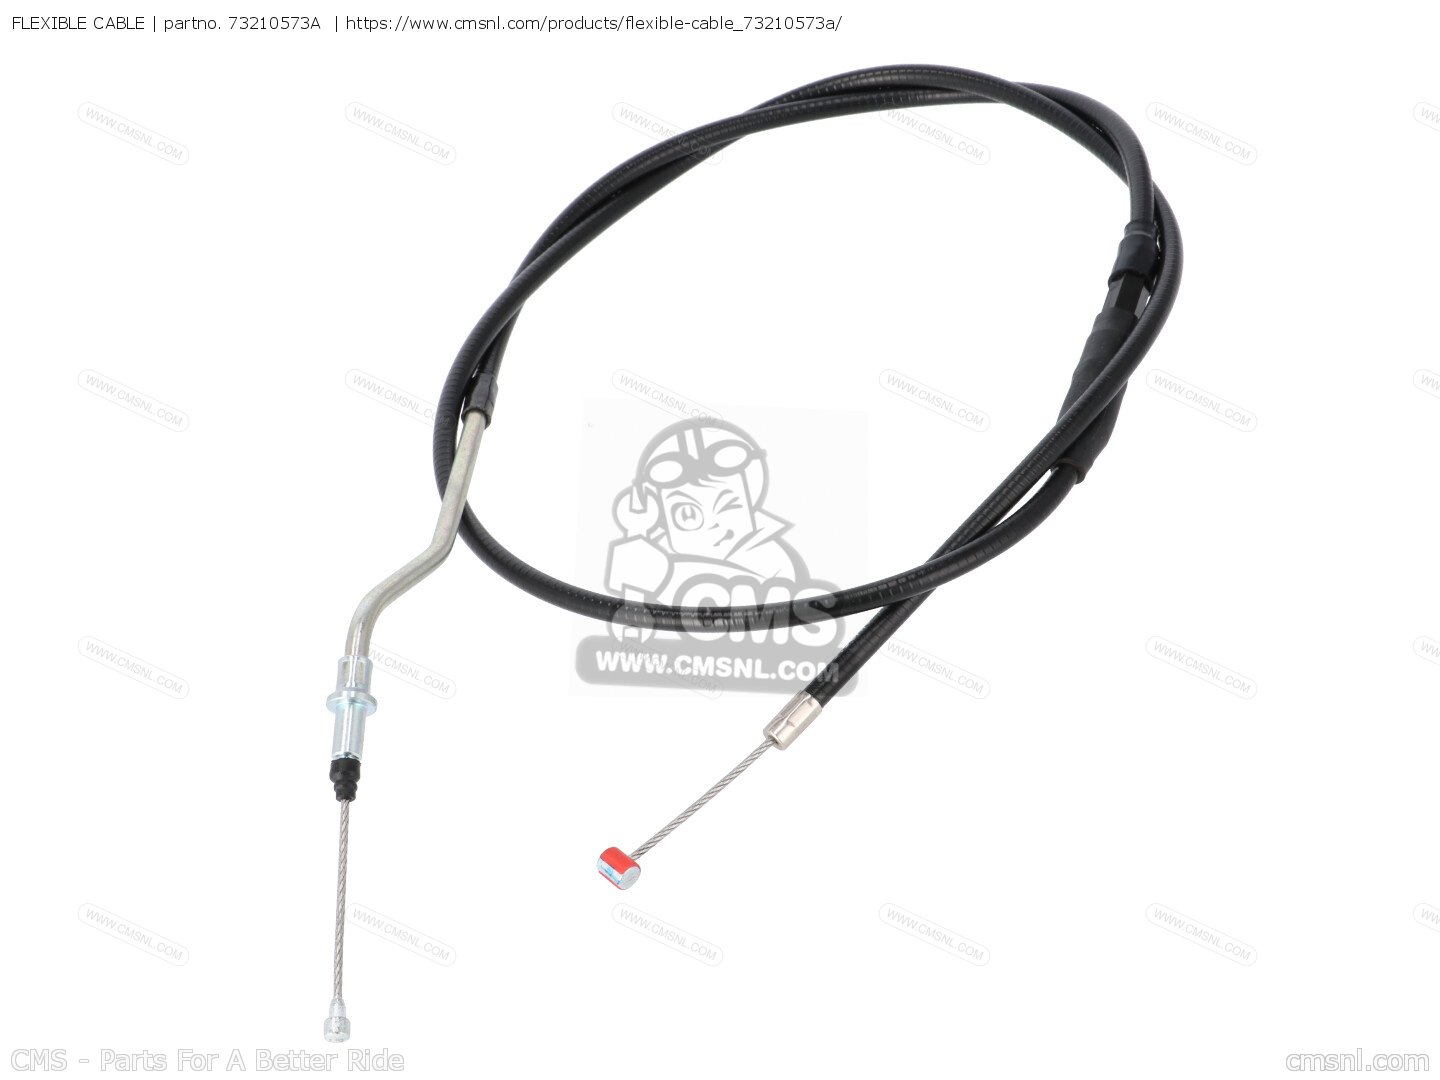 73210573A: Flexible Cable Ducati - buy the 73210573A at CMSNL